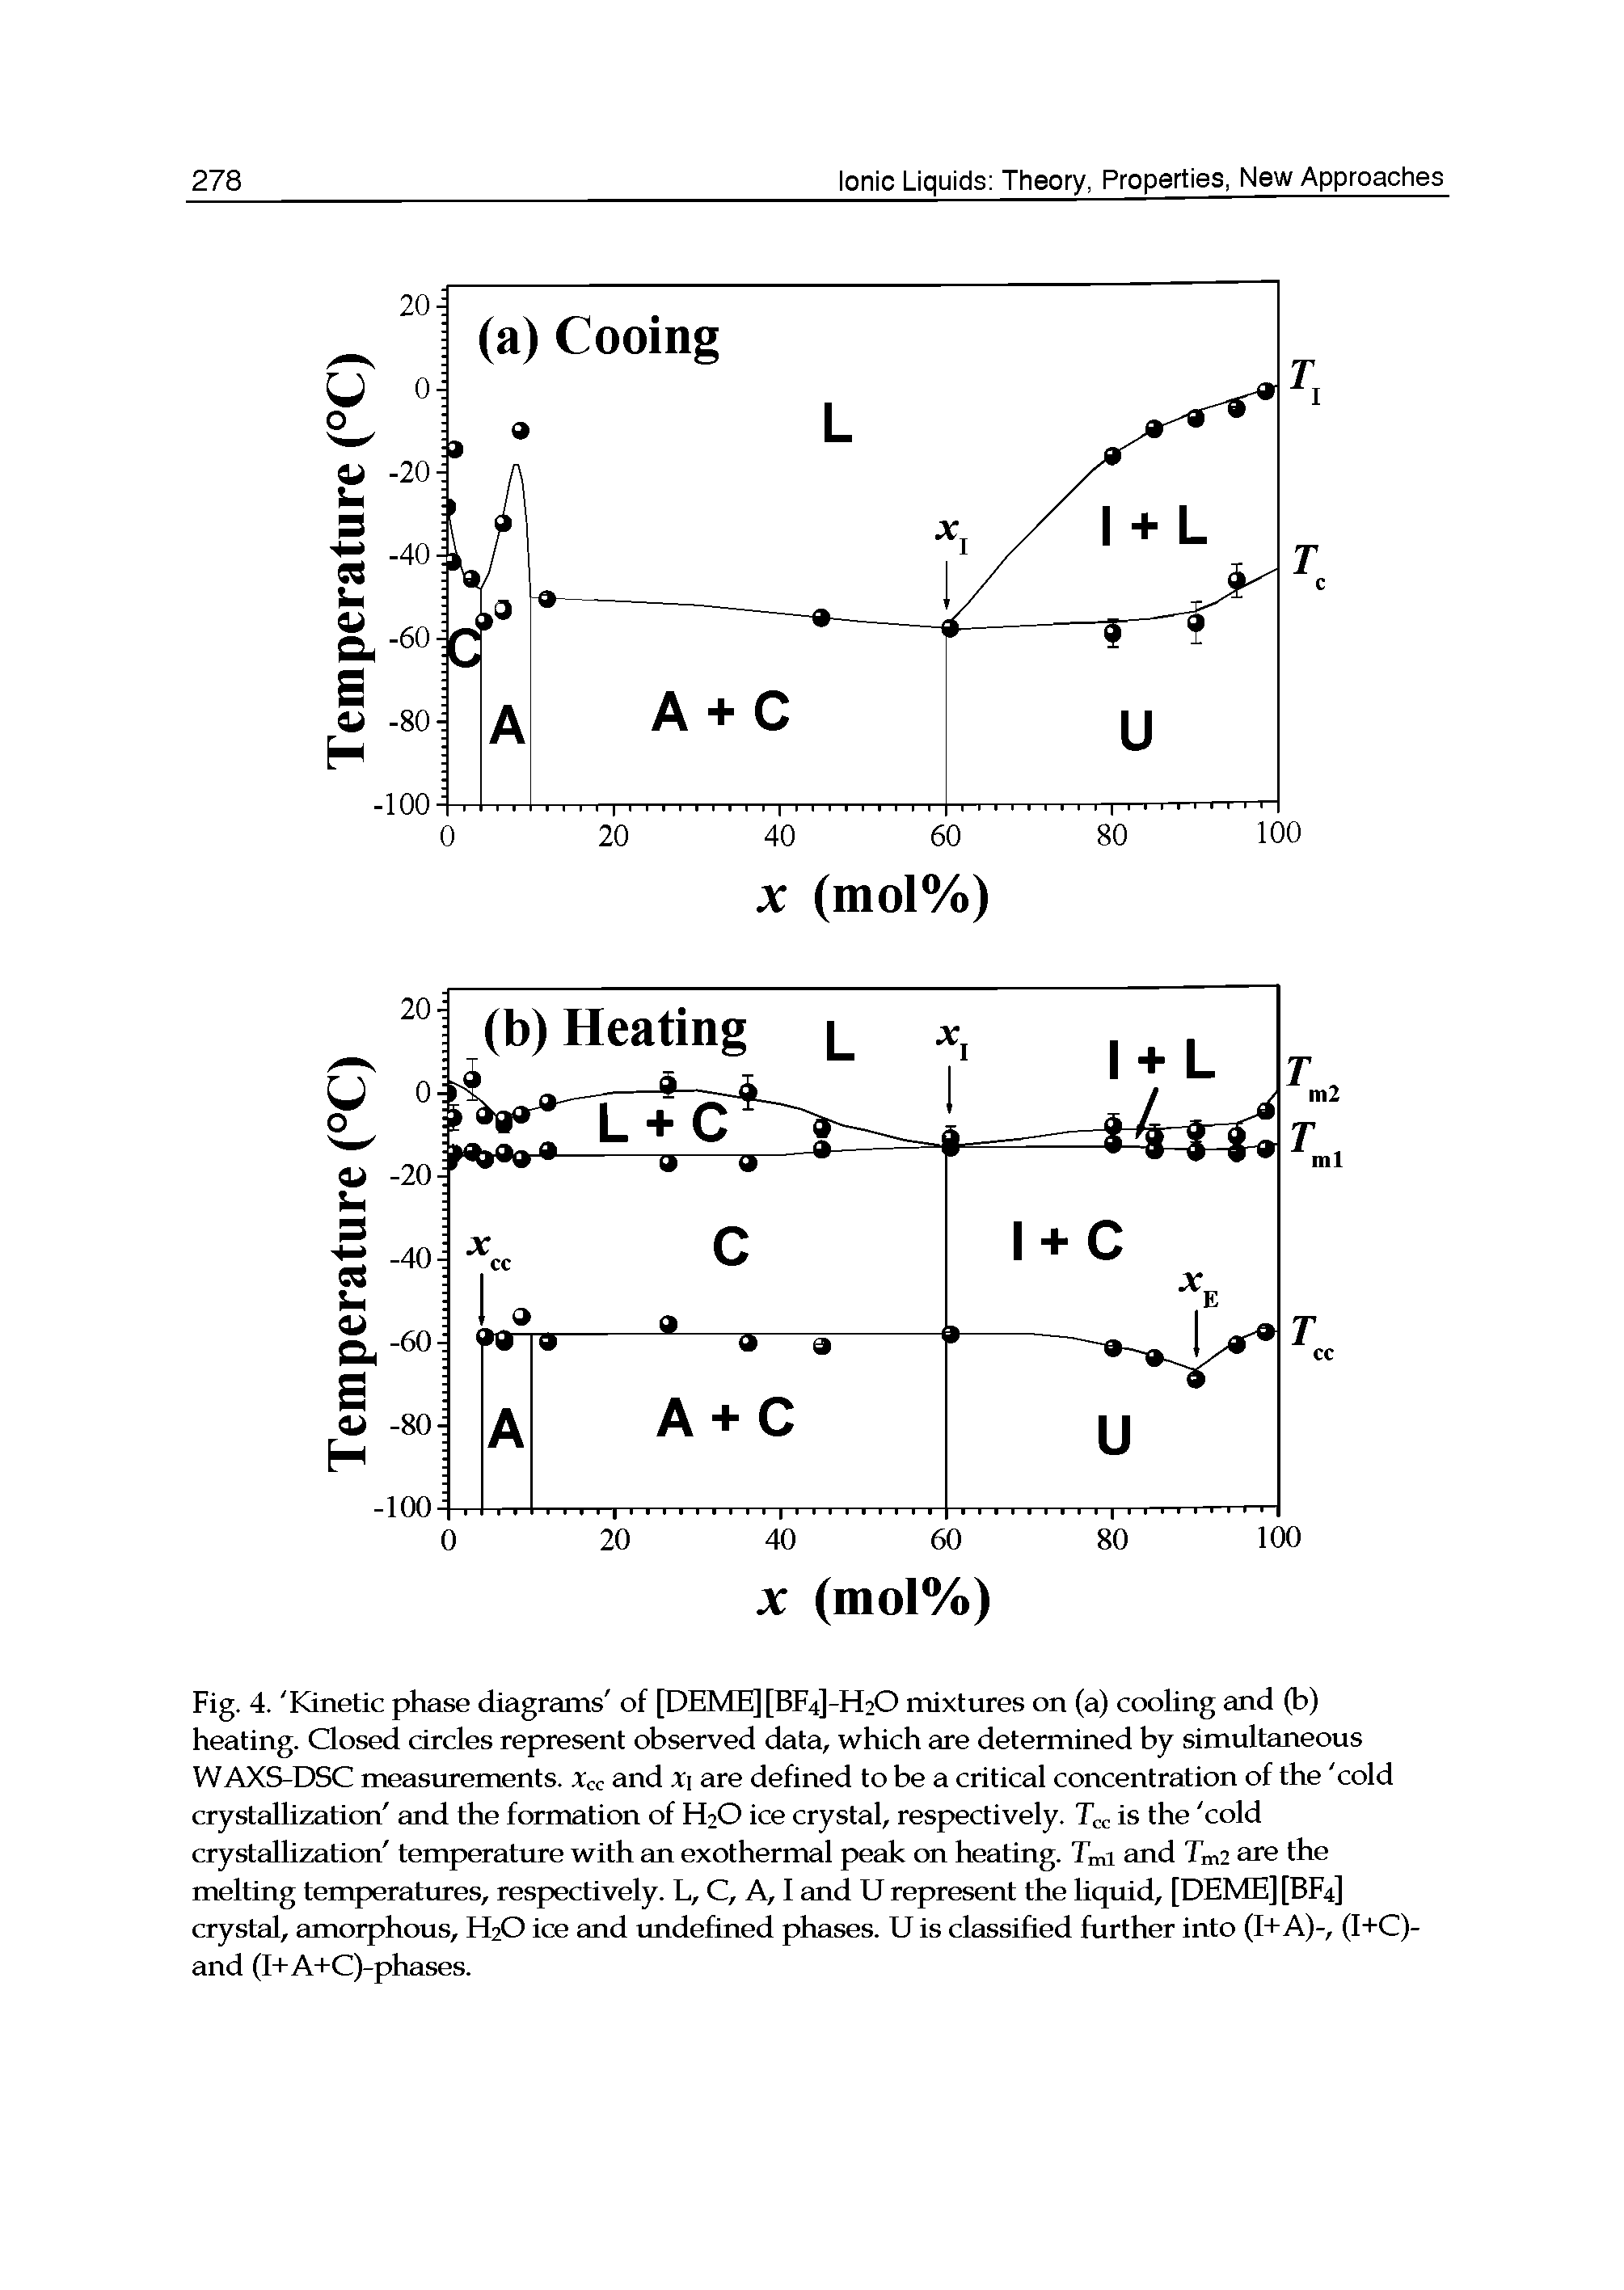 Fig. 4. Kinetic phase diagrams of [DEME][BF4]-H20 mixtures on (a) cooling and (b) heating. Closed circles represent observed data, which are determined by simultaneous WAXS-DSC measurements. Xcc and X are defined to be a critical concentration of the cold aystallization and the formation of H2O ice crystal, respectively. Tcc is the cold aystallization temp>erature with an exothermal peak on heating. Tmi and Tml are the melting temperatures, respectively. L, C, A, I and U represent the liquid, [DEME][BF4] crystal, amorphous, H2O ice and imdefined phases. U is classified further into (1+A)-, (I+C)-and (I+A+C)-phases.